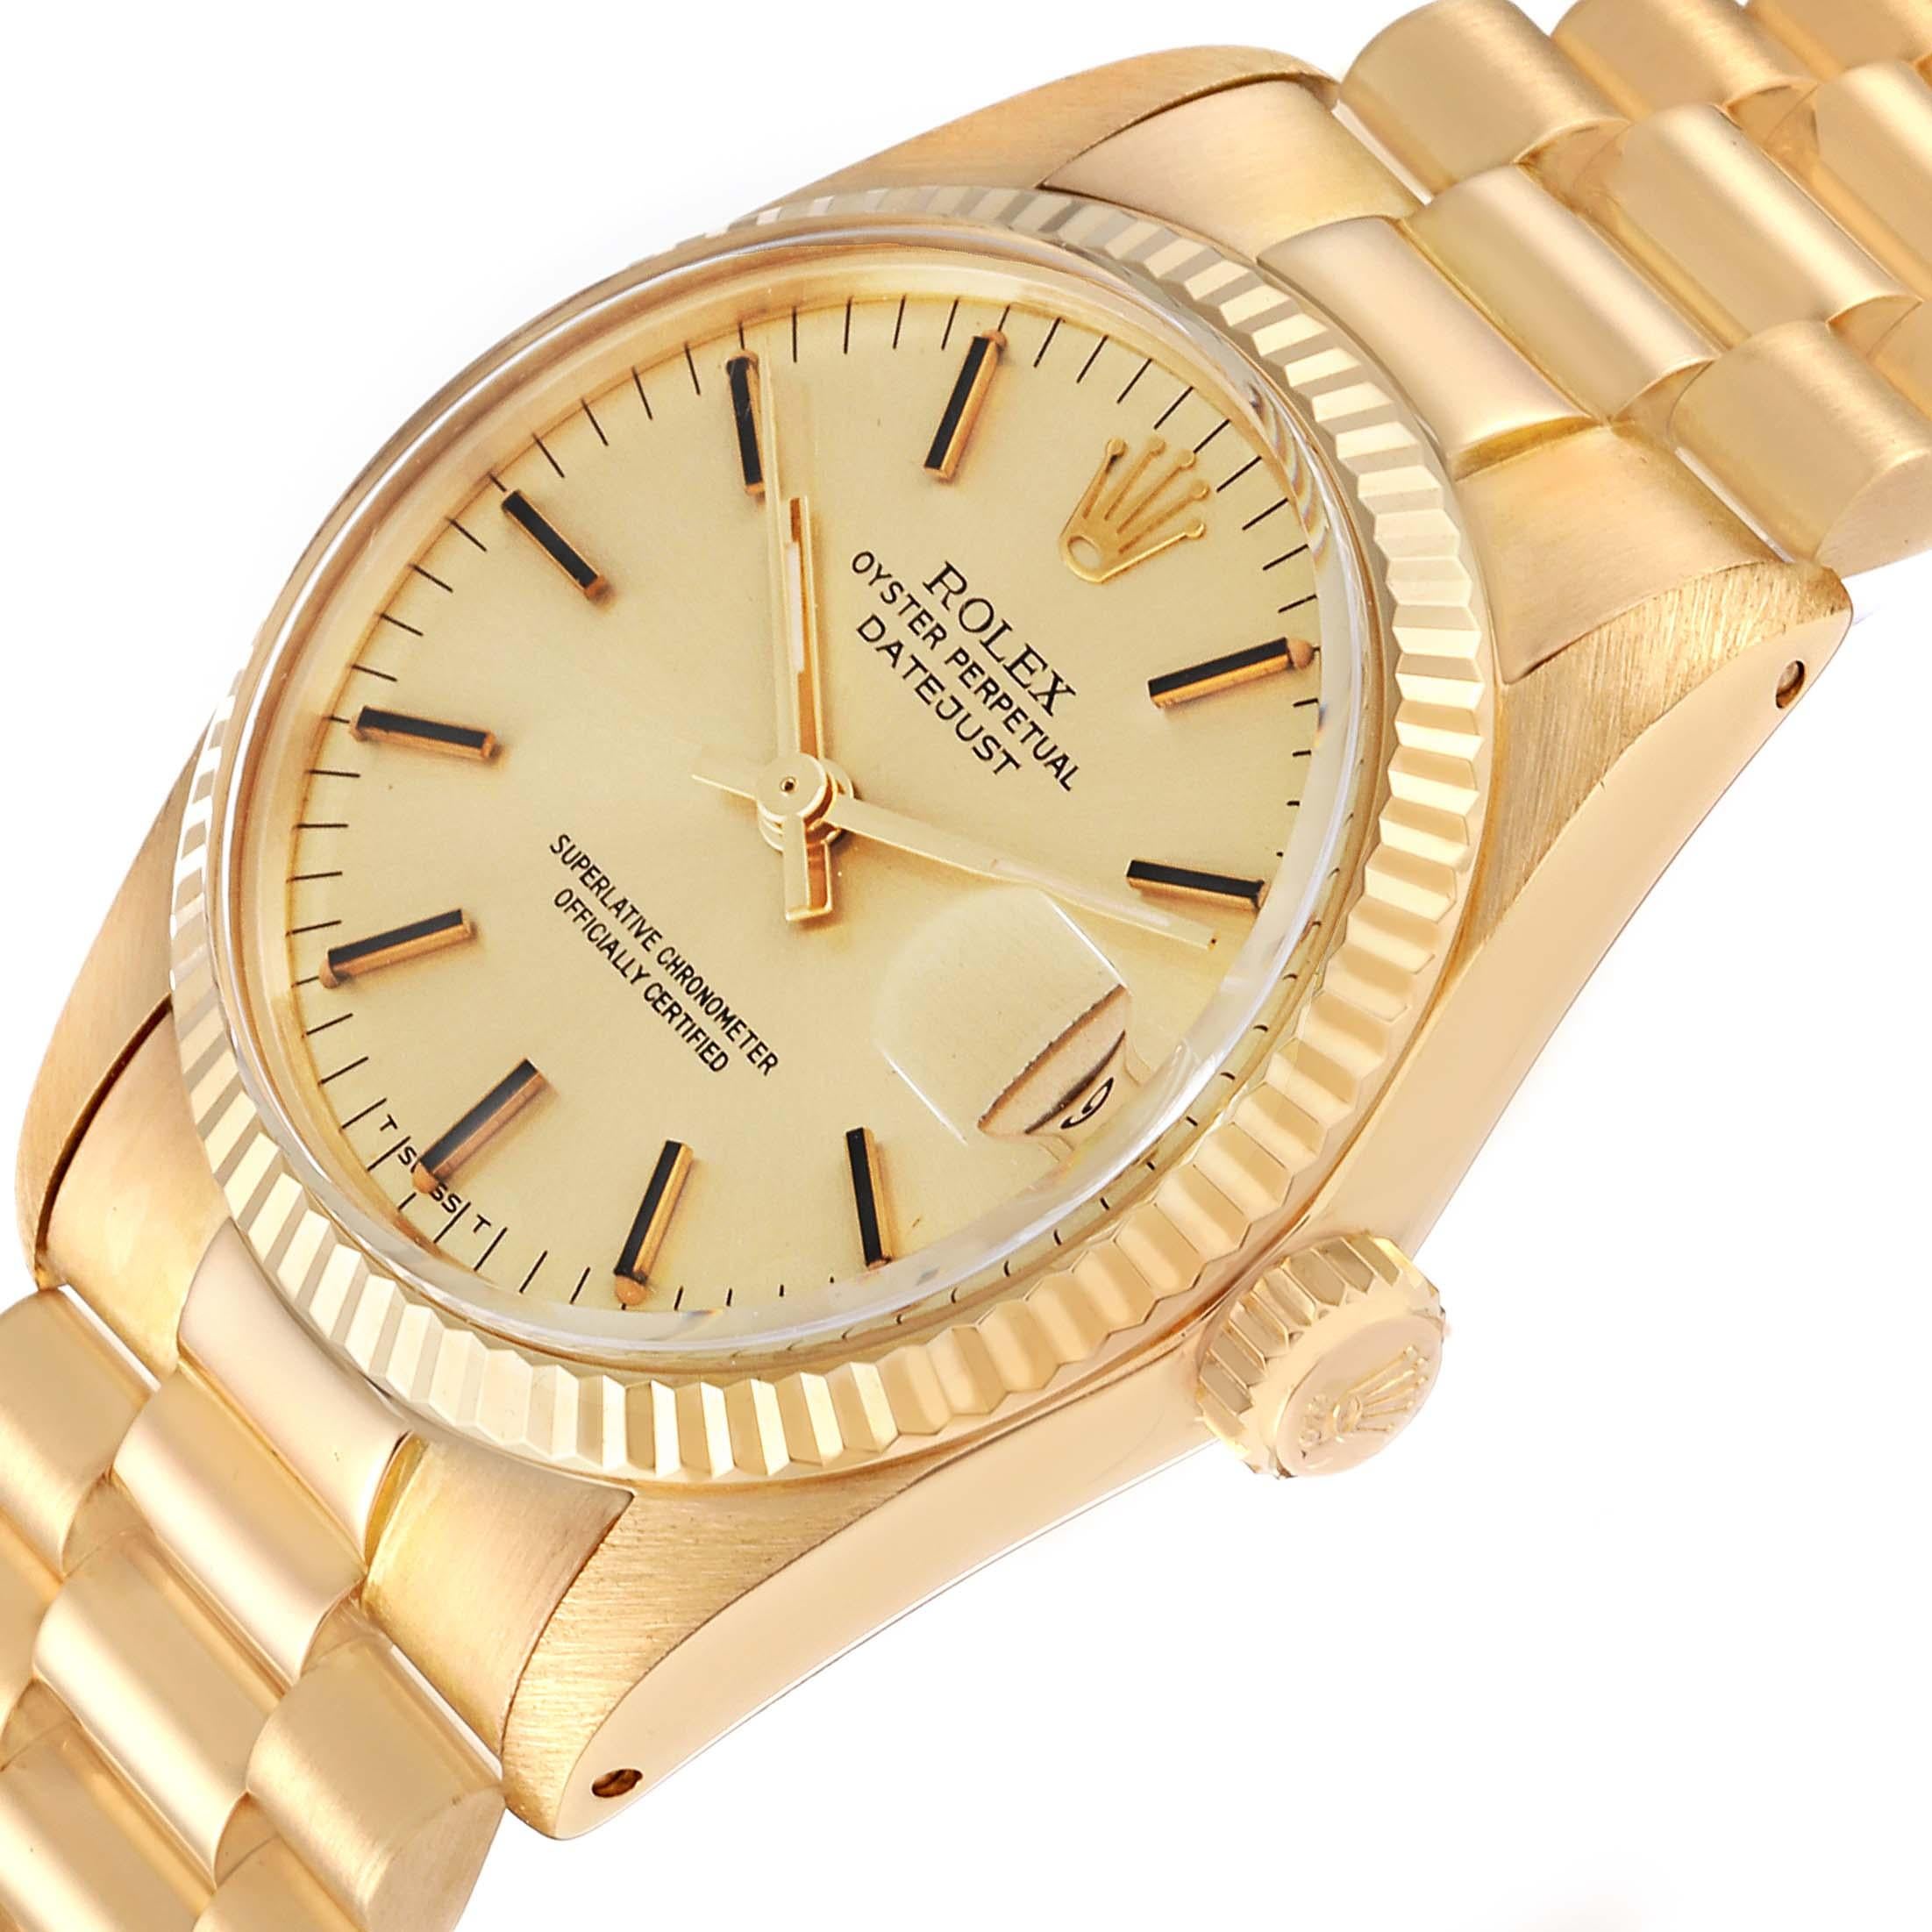 Rolex President Datejust Midsize 31mm Yellow Gold Vintage Ladies Watch 6827. Officially certified chronometer automatic self-winding movement. 18k yellow gold oyster case 31.0 mm in diameter. Rolex logo on a crown. 18k yellow gold fluted bezel.